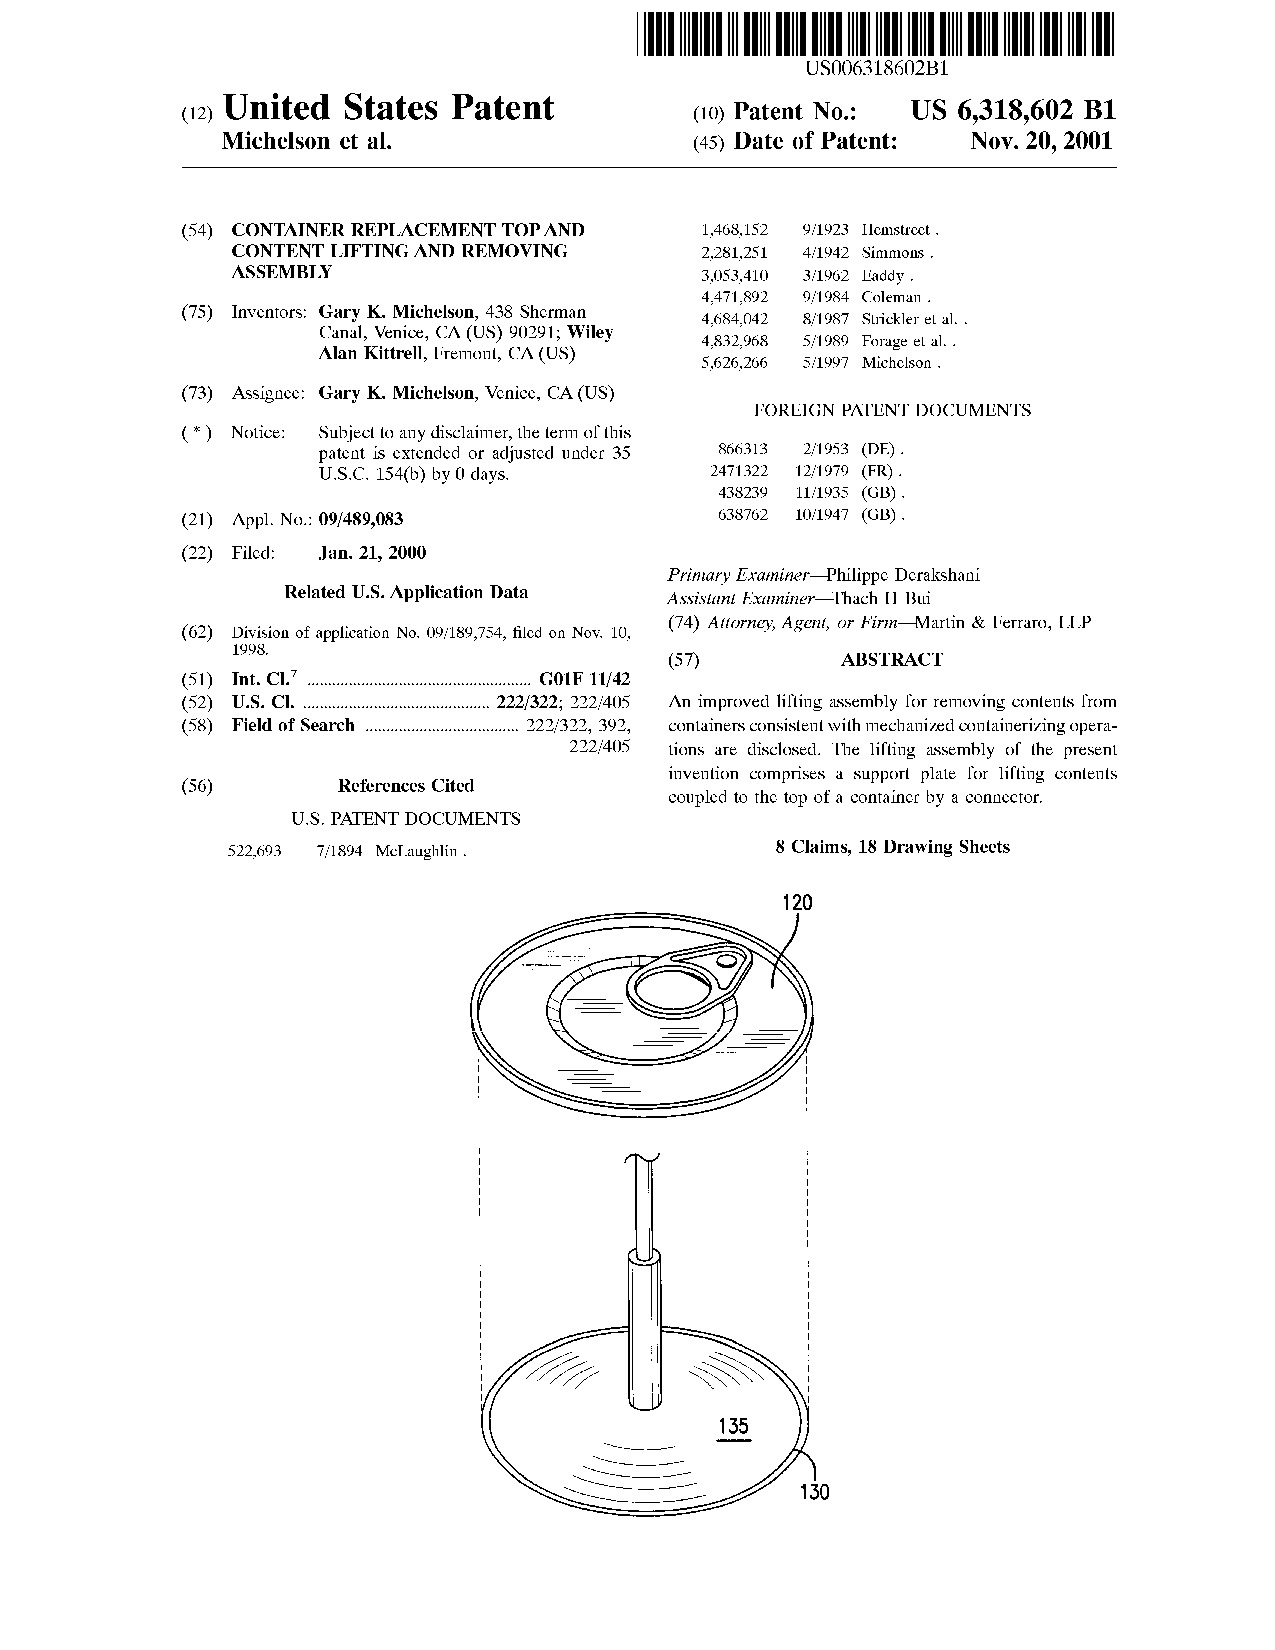 Container replacement top and content lifting and removing assembly - Patent 6,318,602